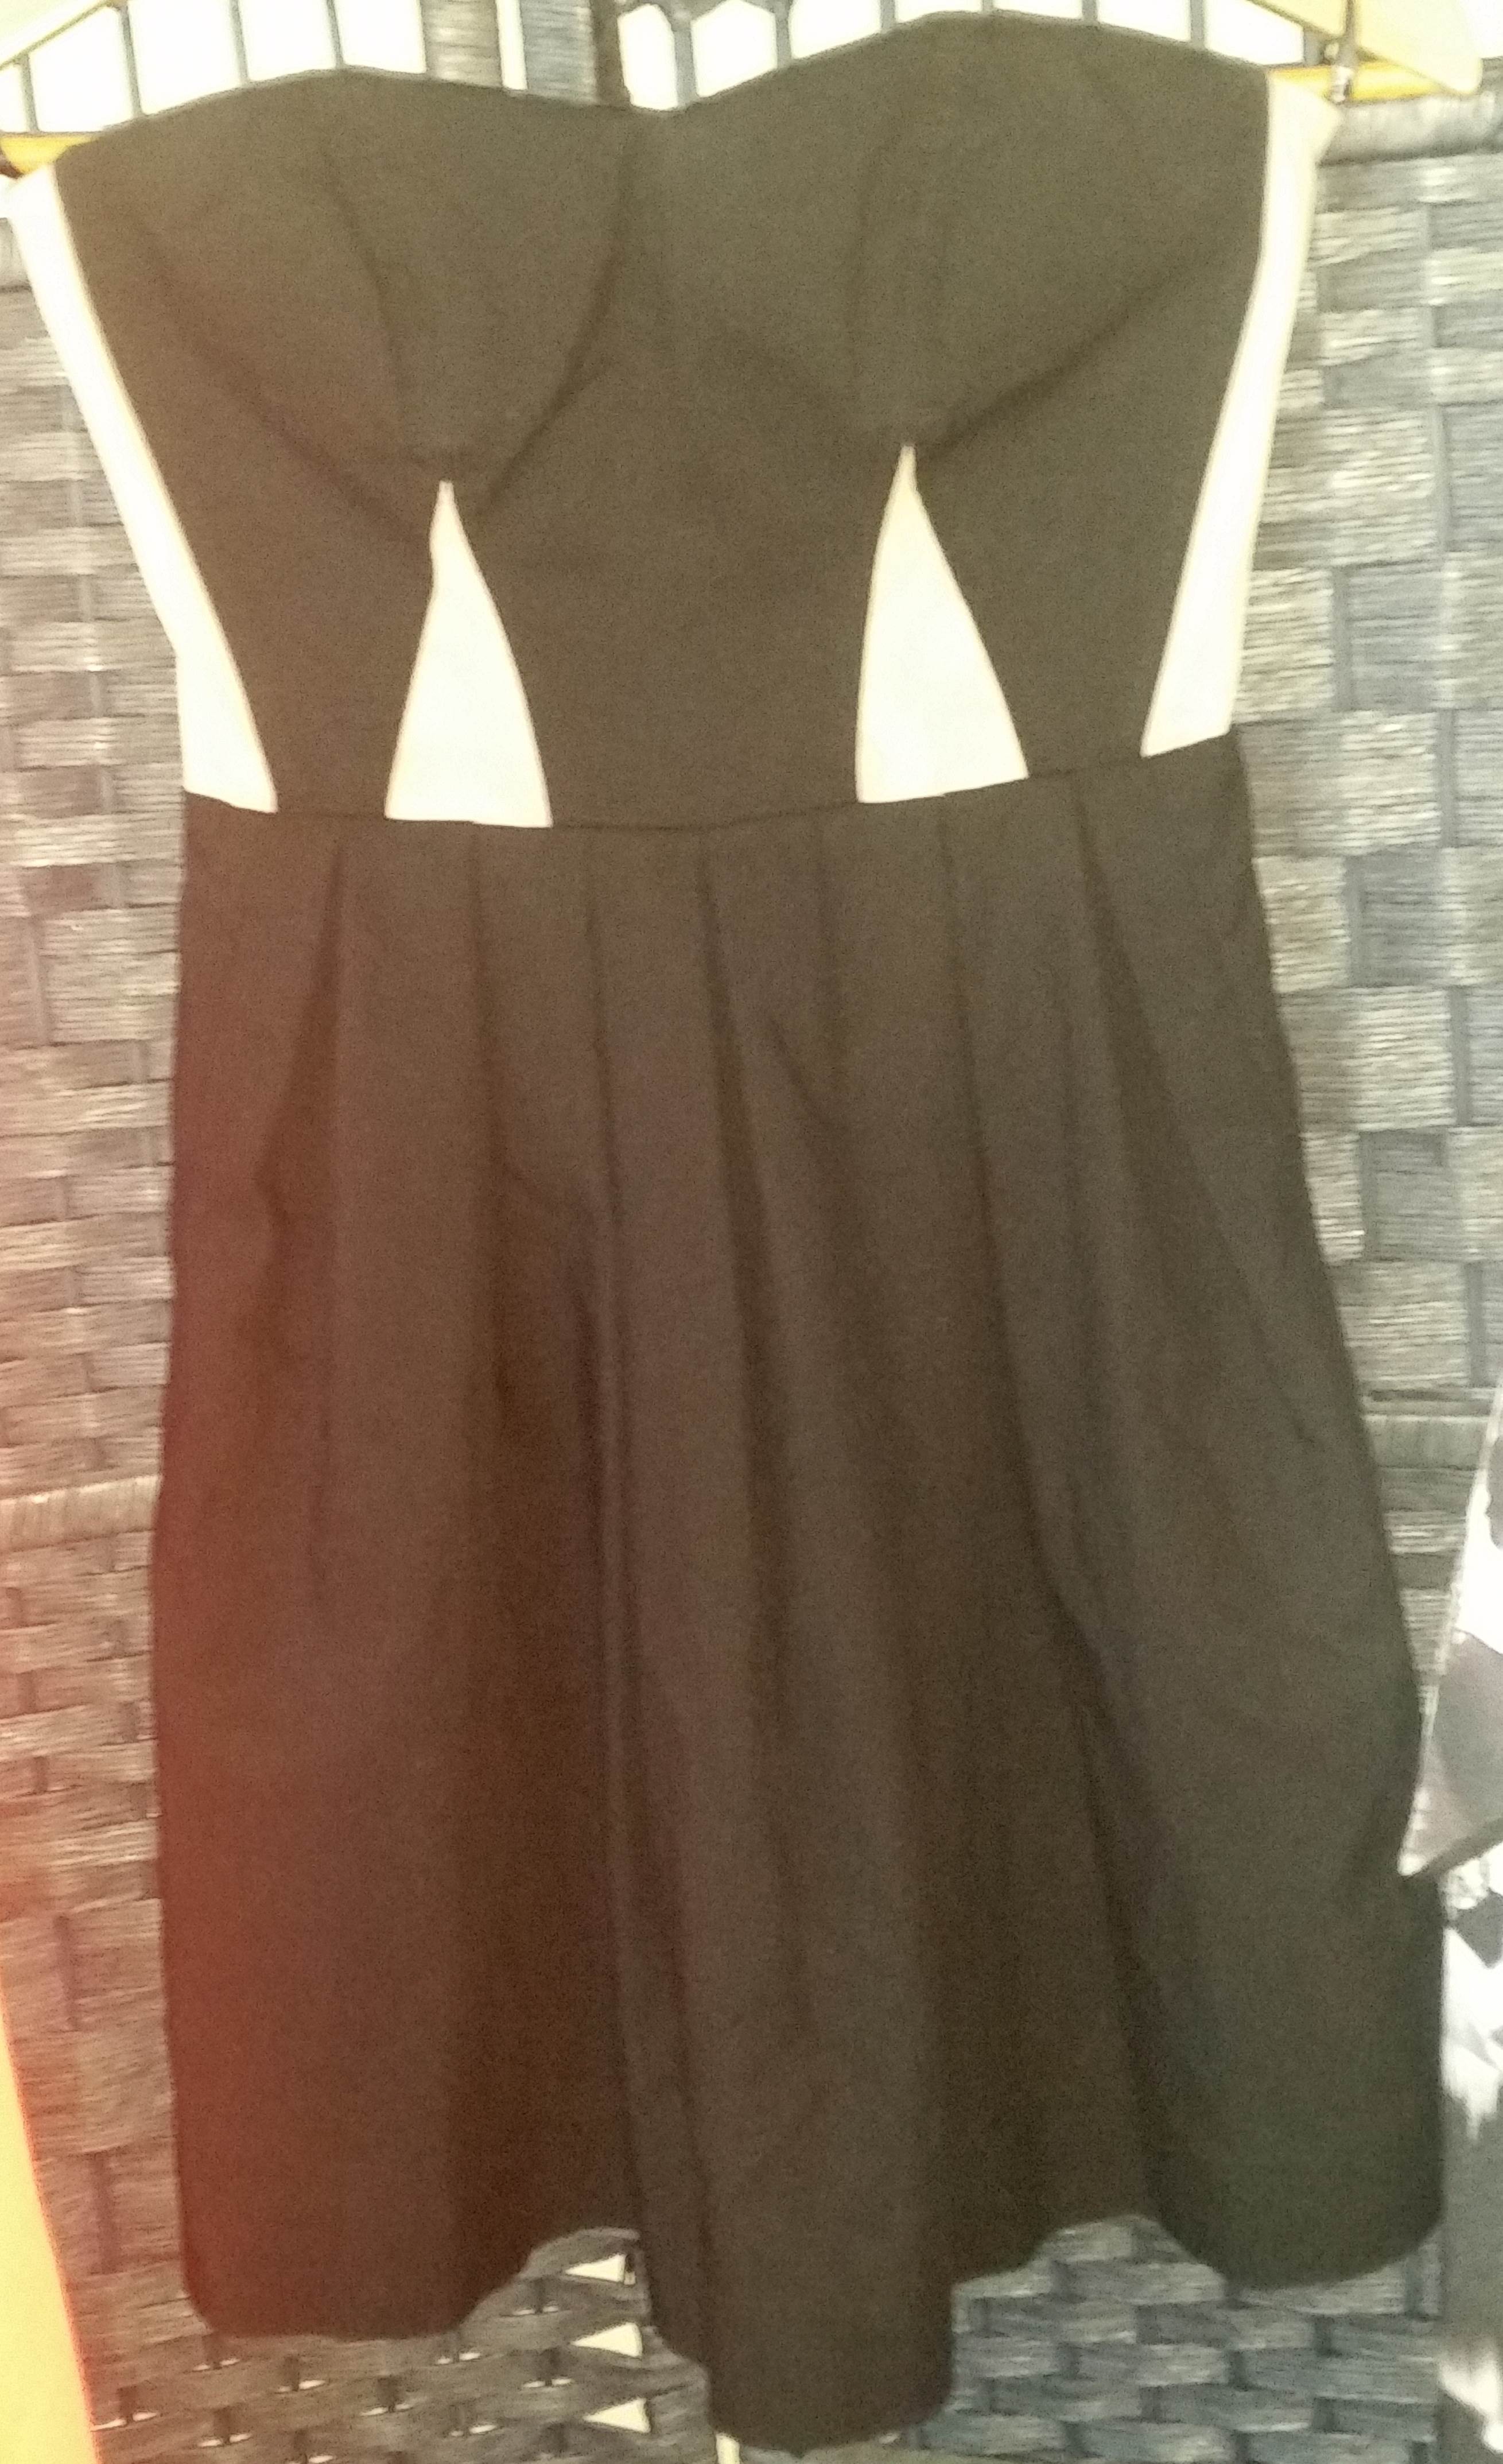 Bardot Strapless A-Line Dress Size 6 Black with Beige Accents